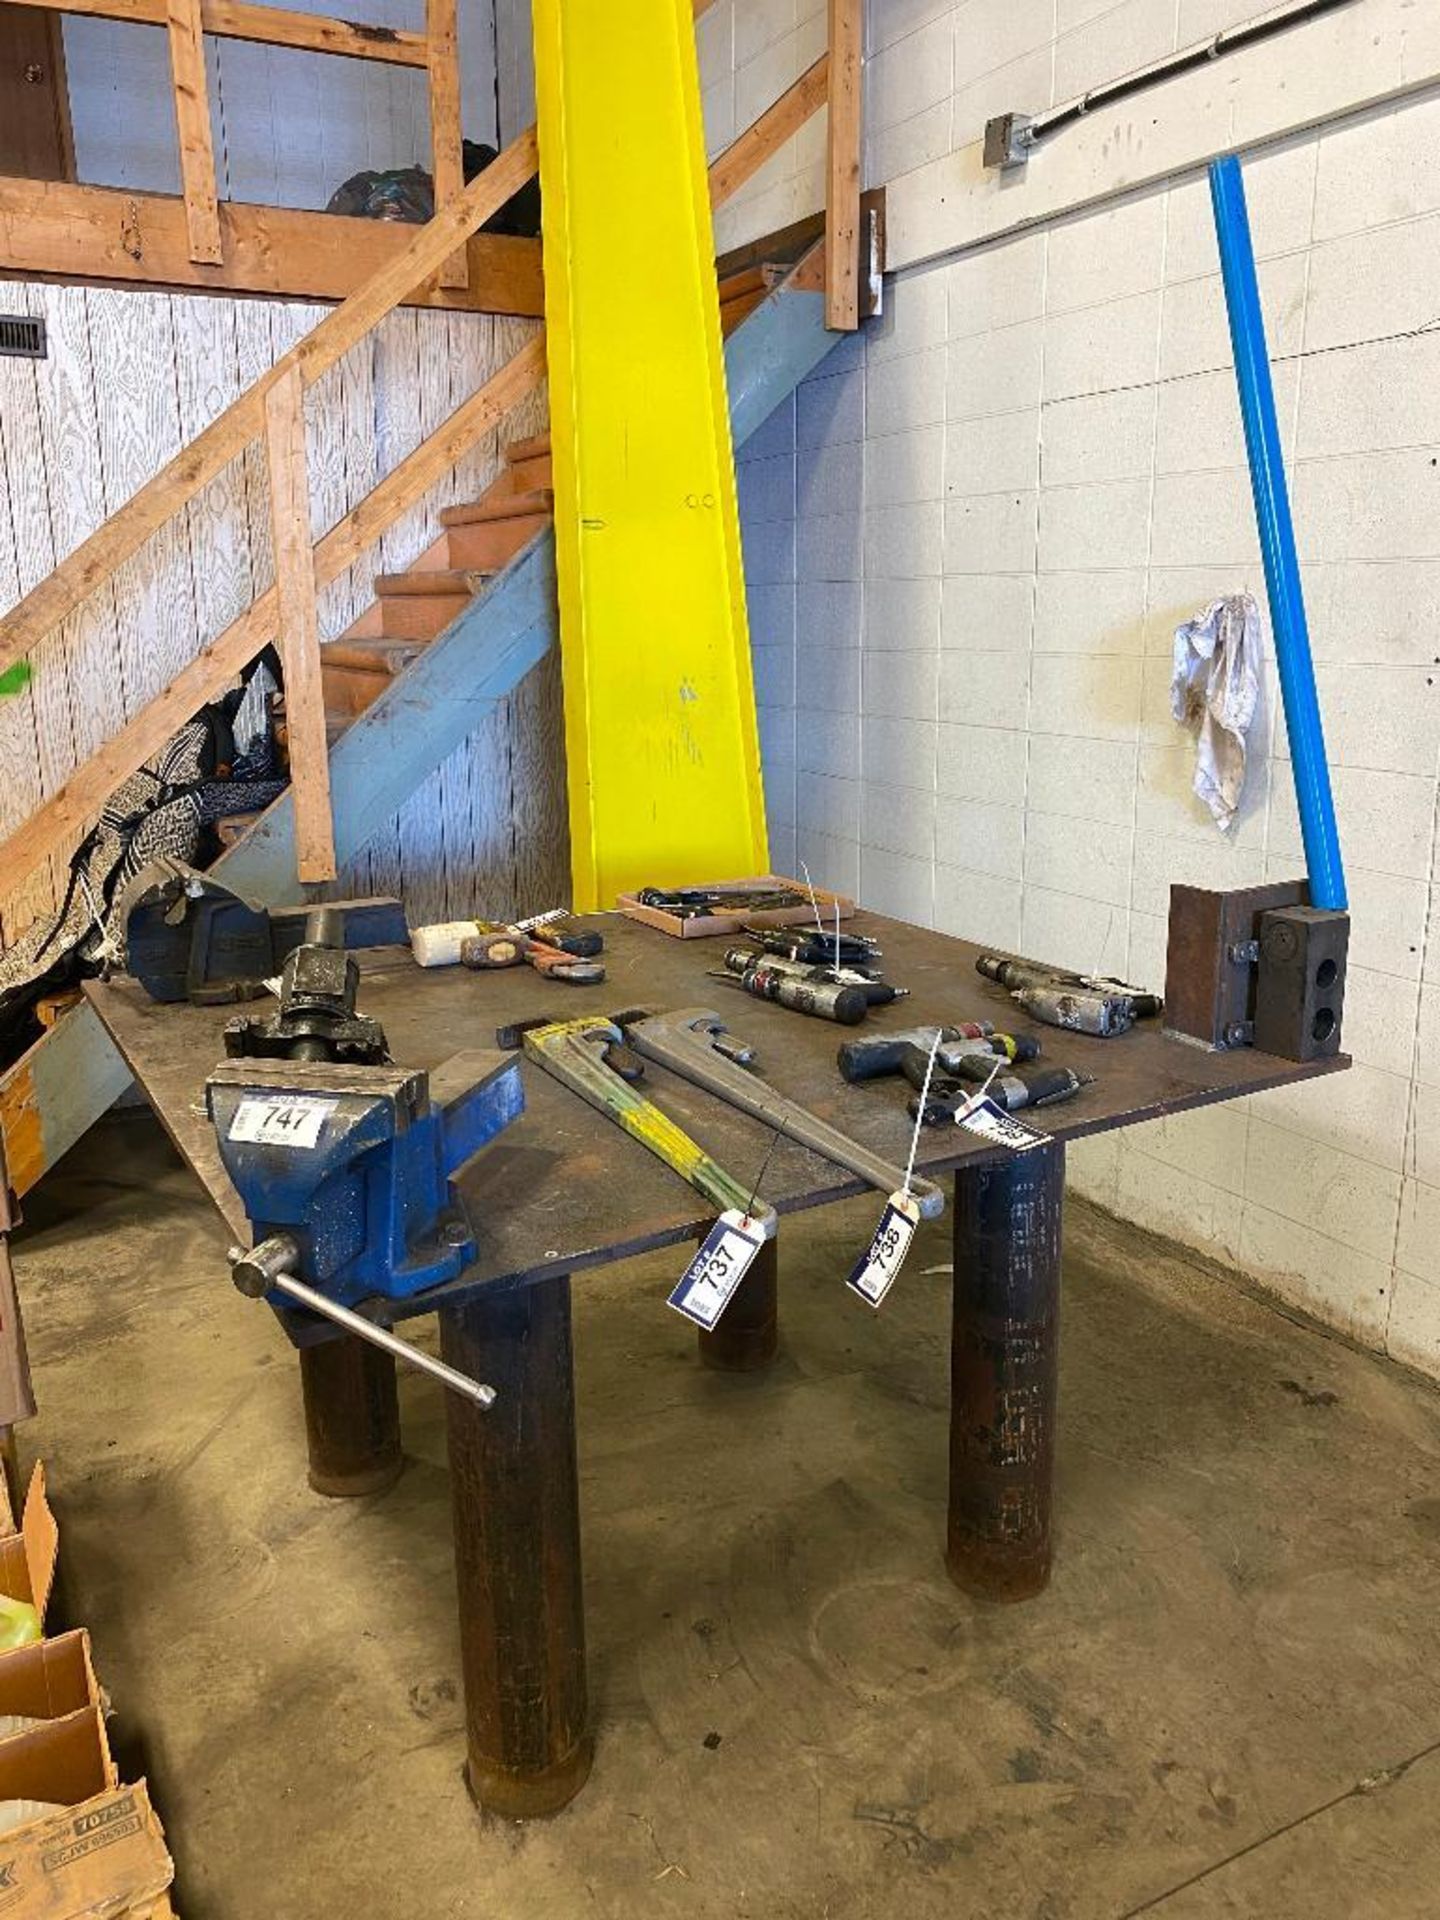 60" X 60" Steel Welding Table w/ Irwin Record 8" Bench Vise and Almi Pipe Notcher